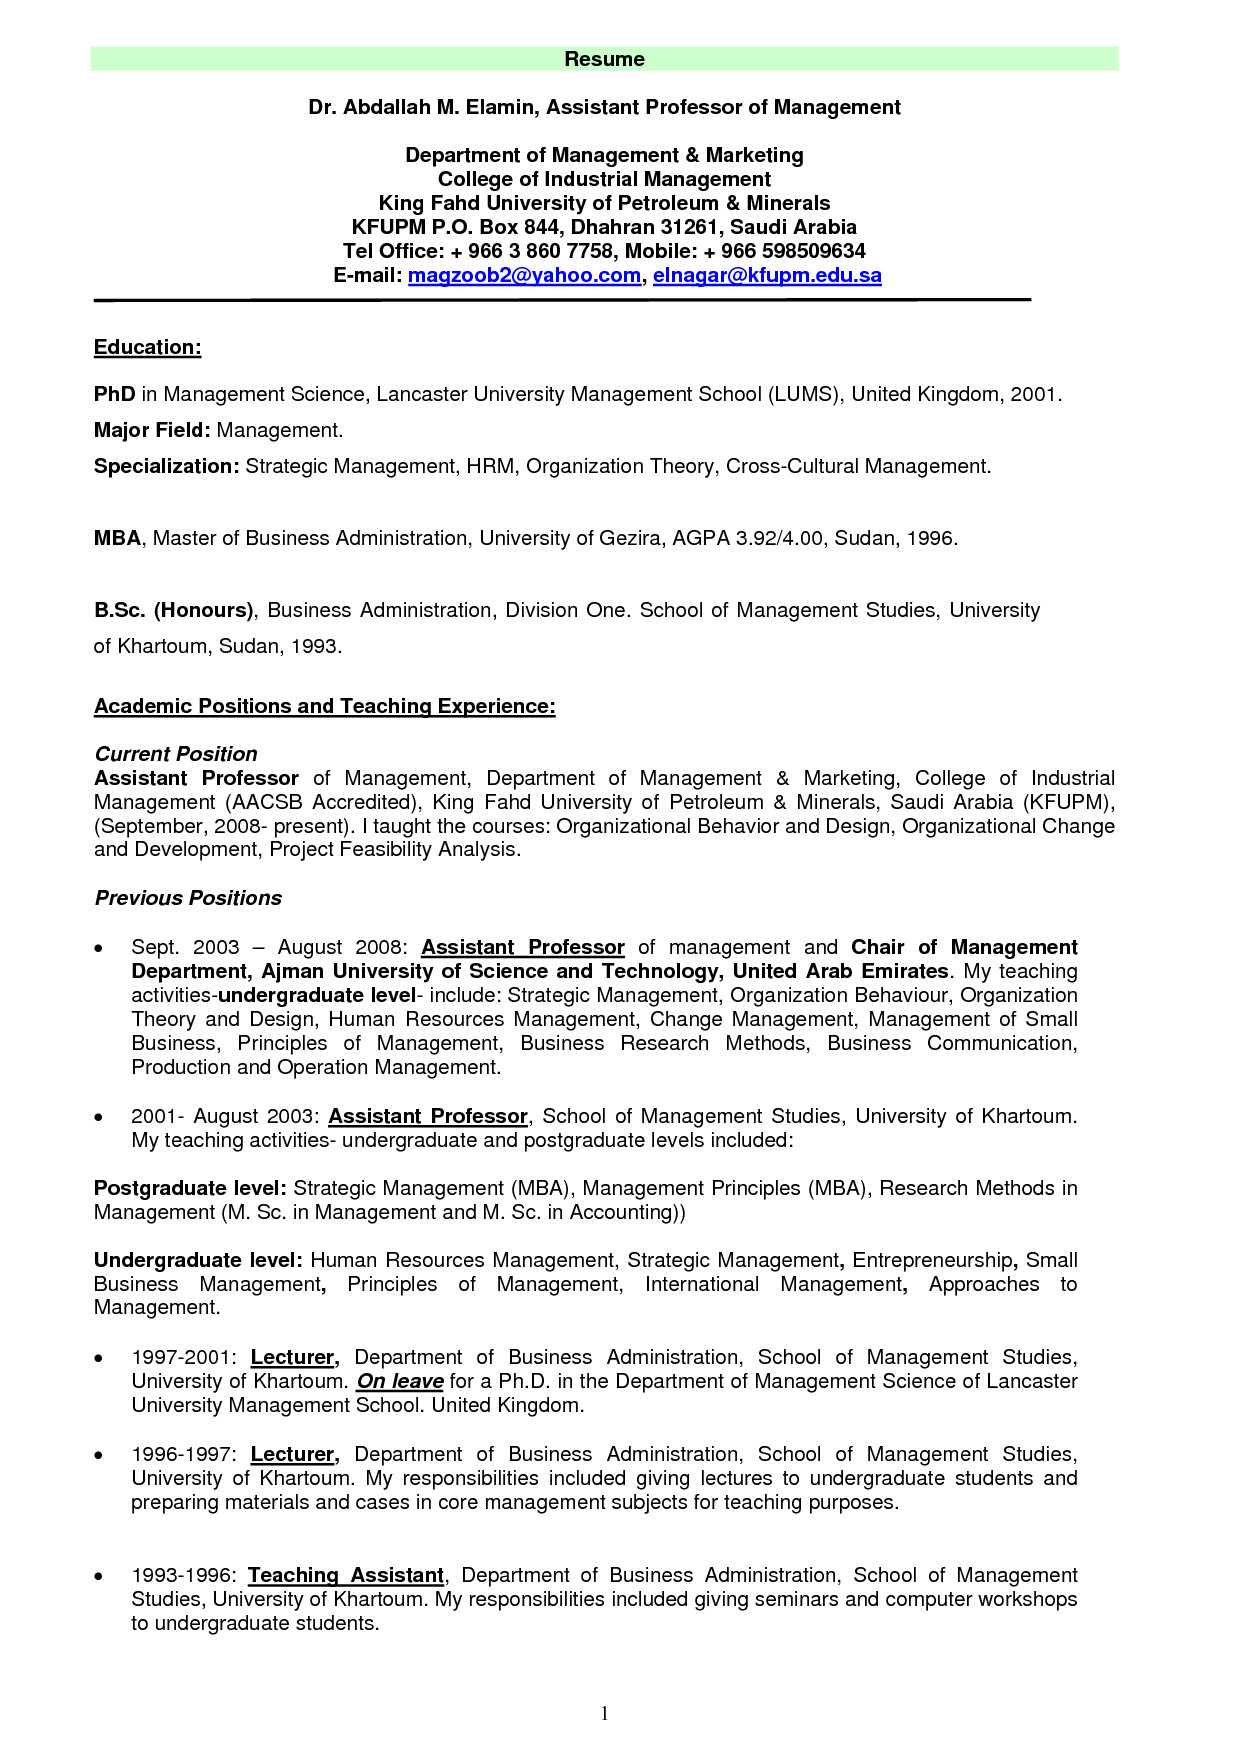 Sample Resume for Experienced assistant Professor In Engineering College Professor Resume Template